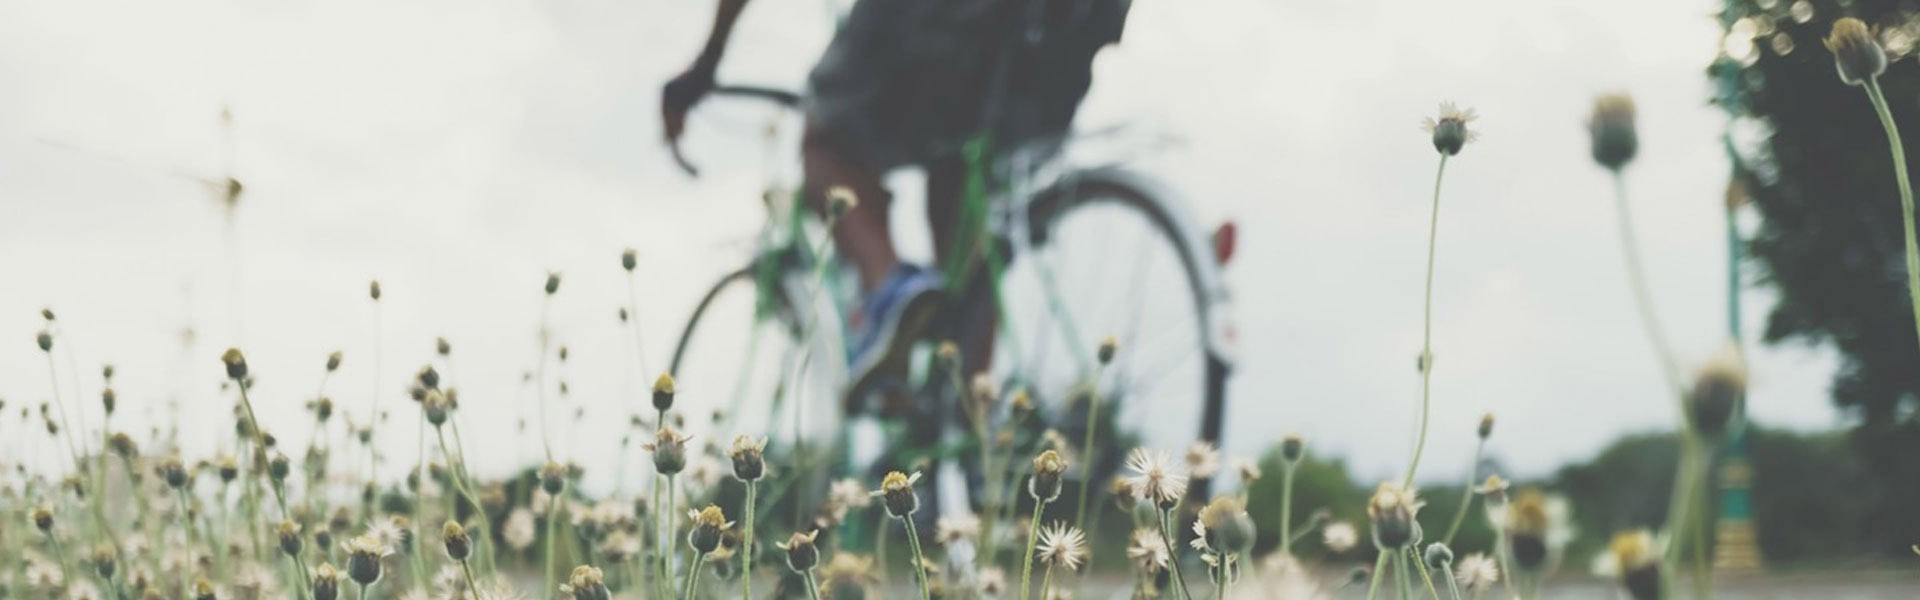 Flowers in the grass and a bicycle